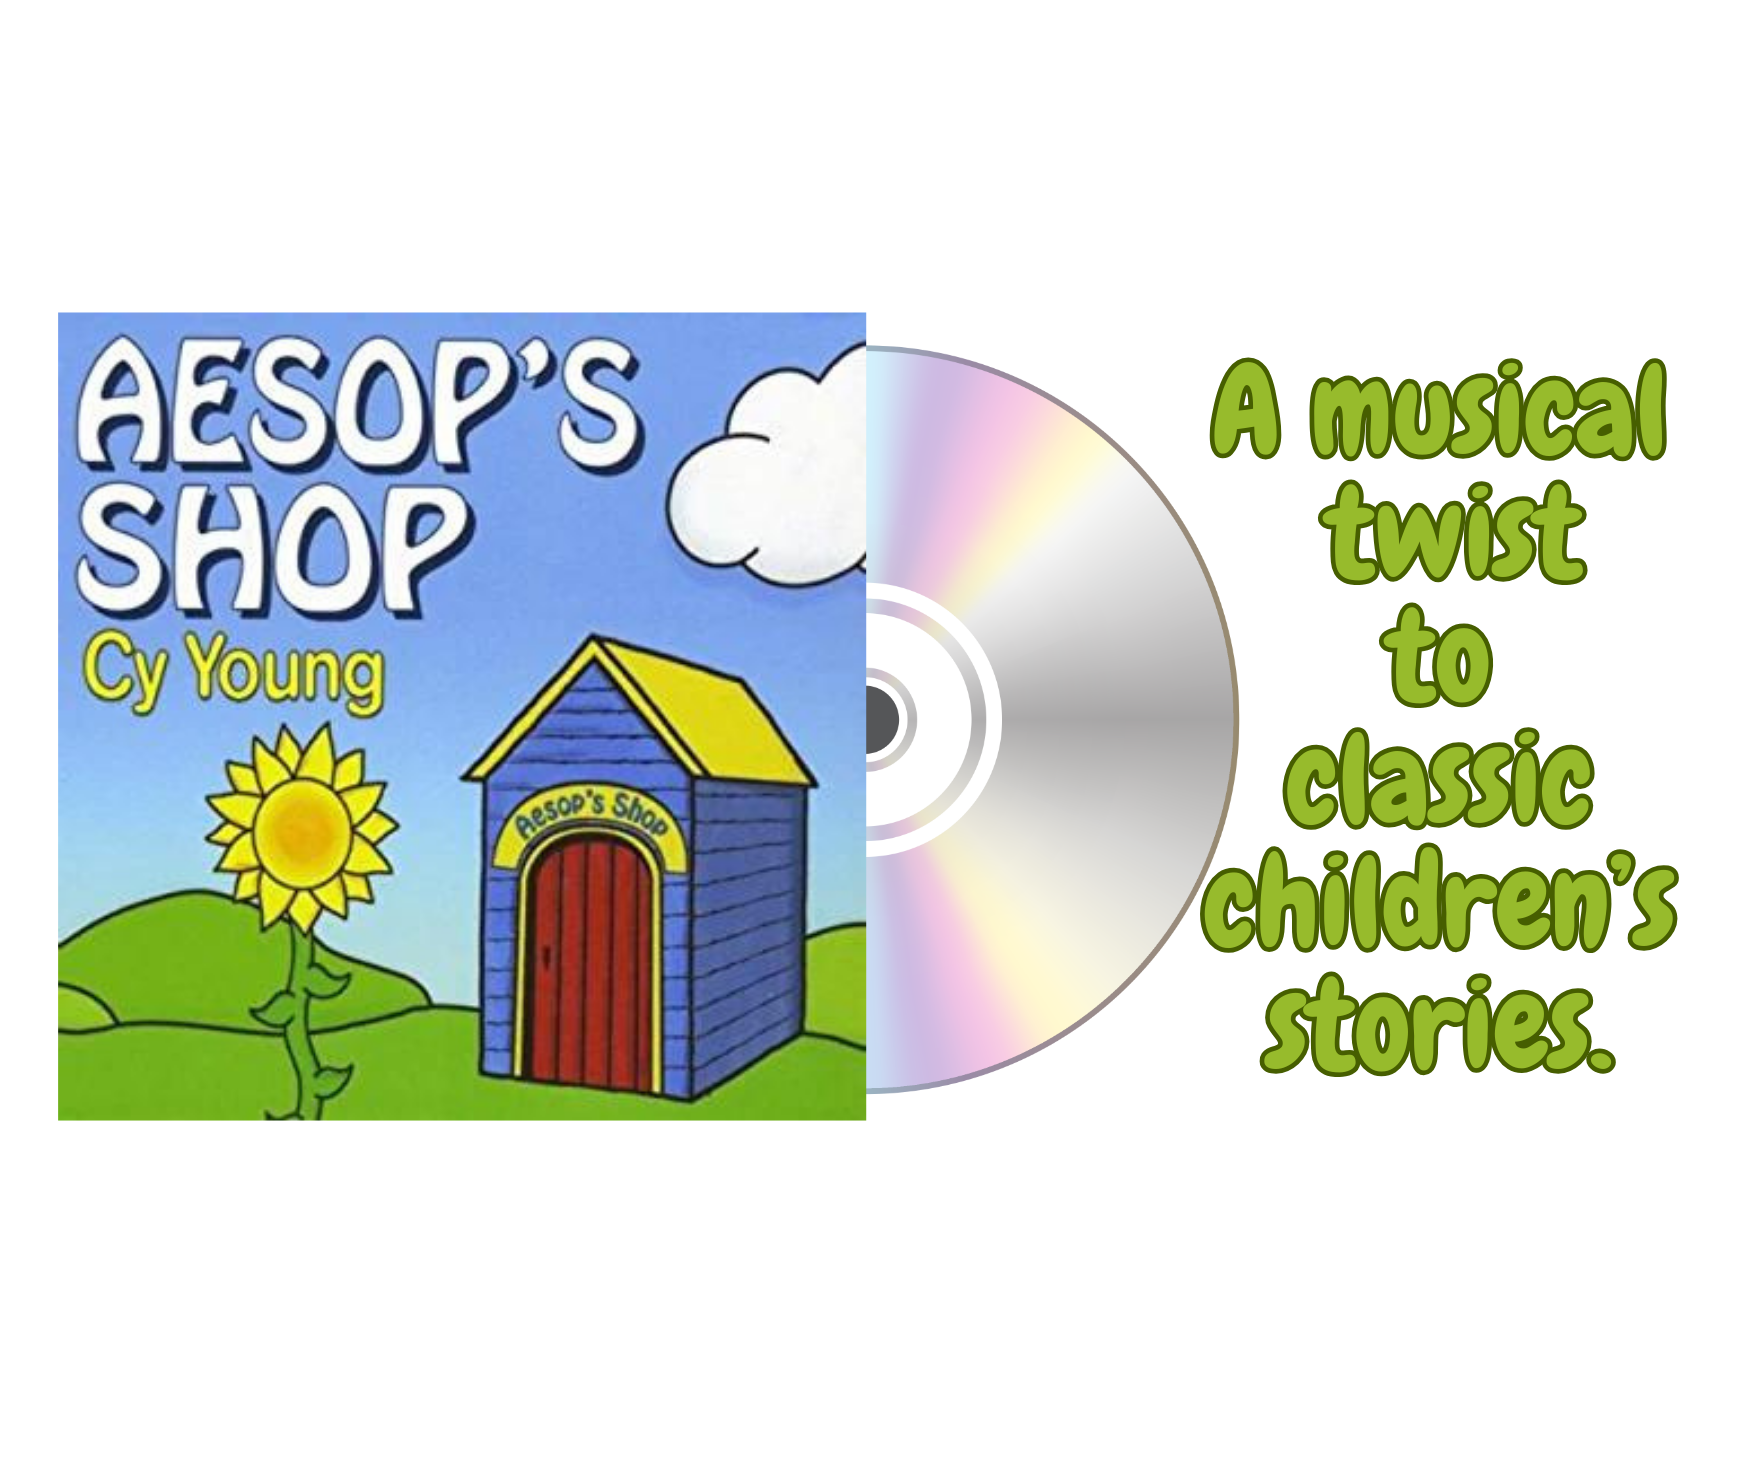 Aesop's Shop CD cover with yellow sunflower and small building